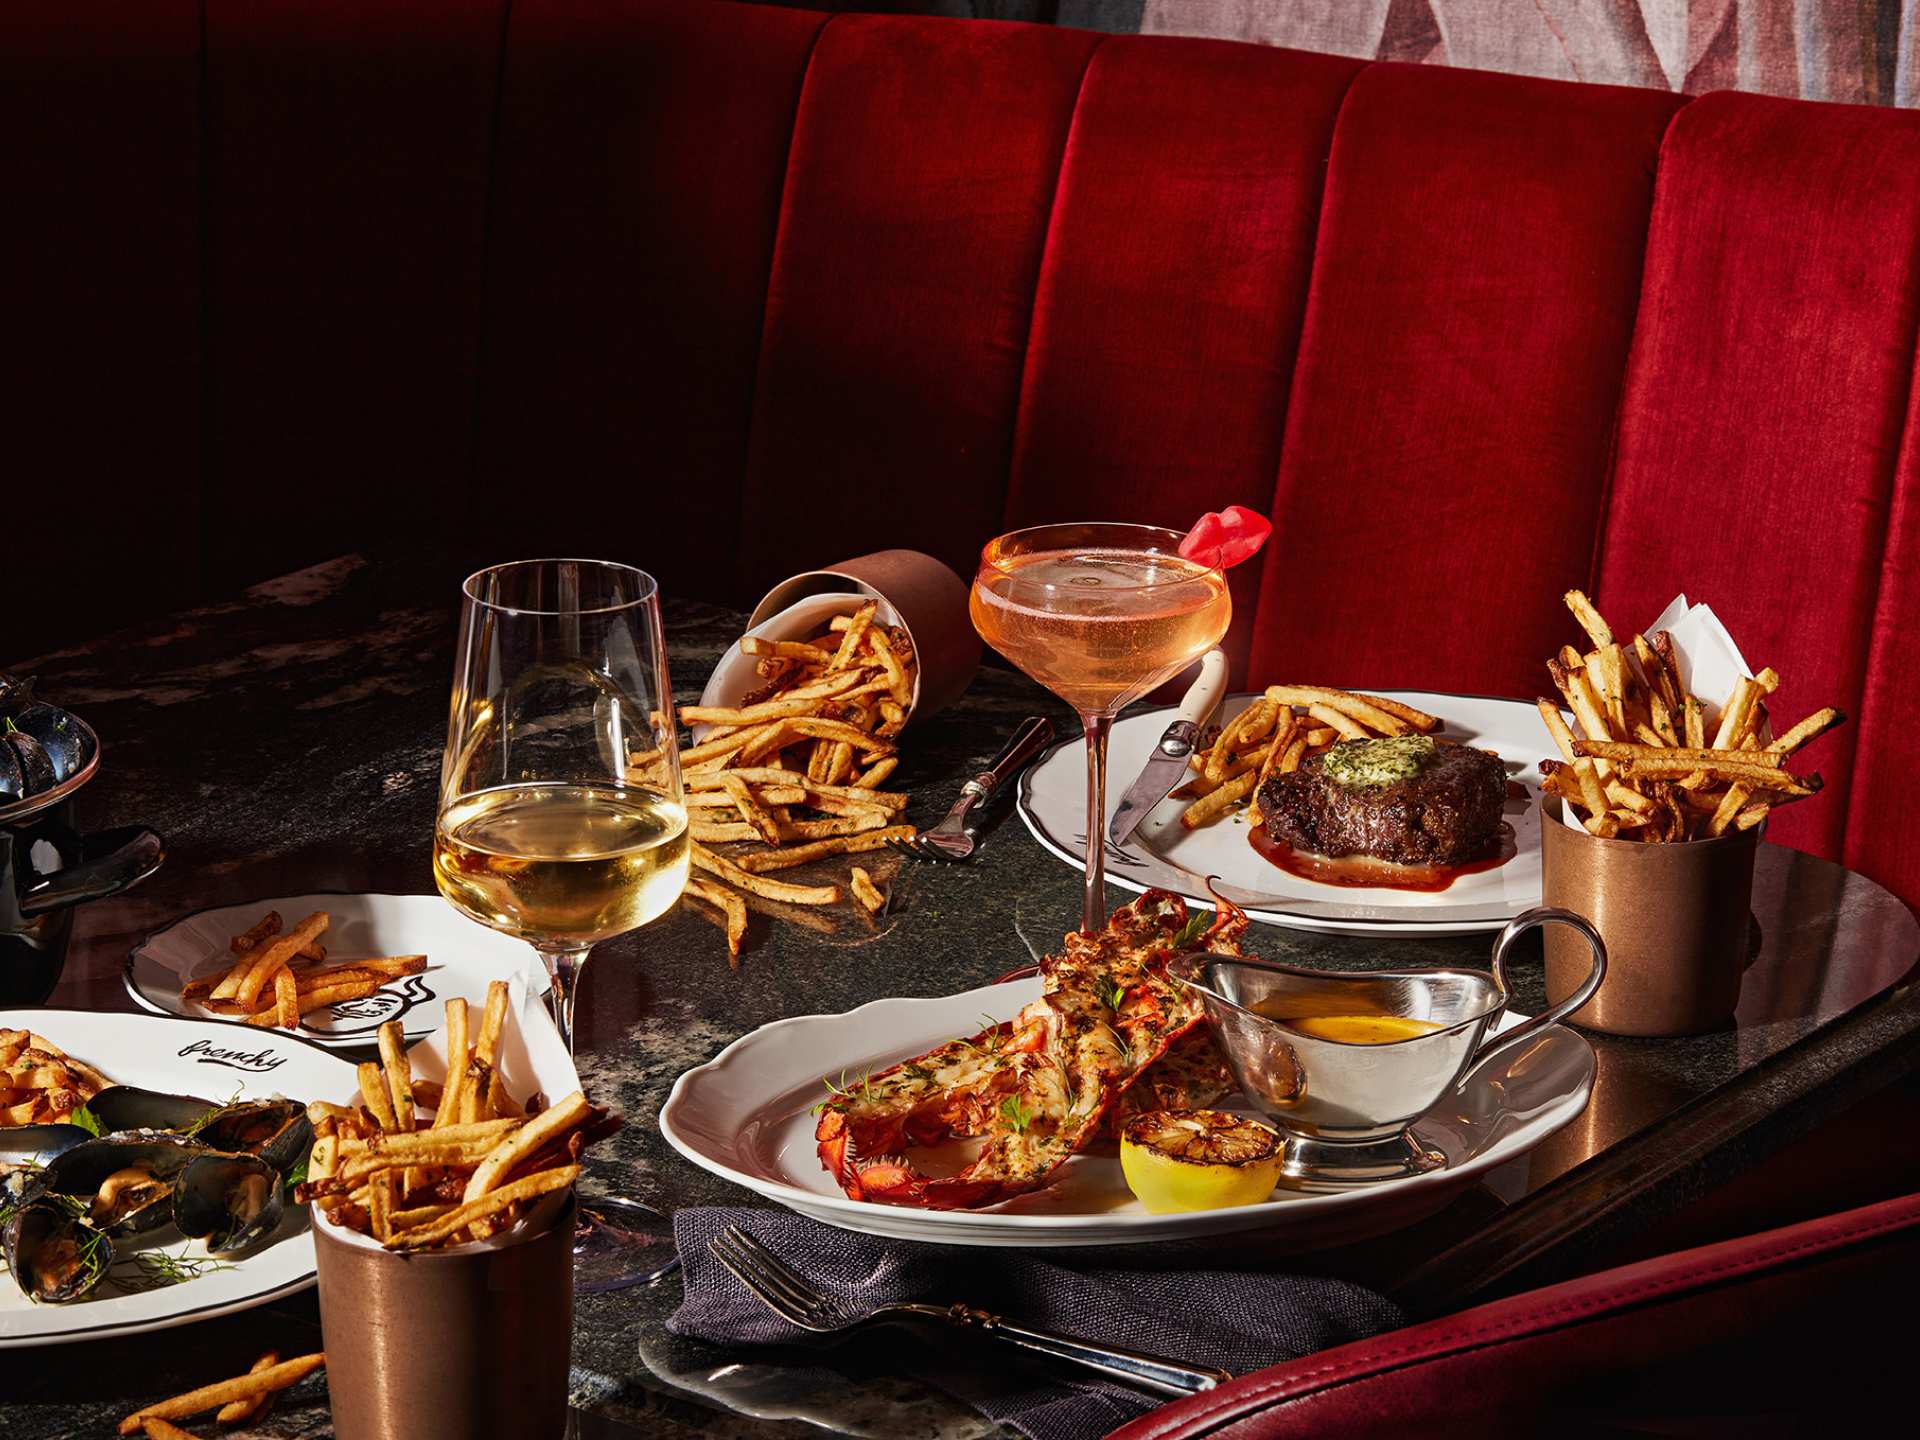 Best new restaurants Toronto | Frites and other food at Frenchy